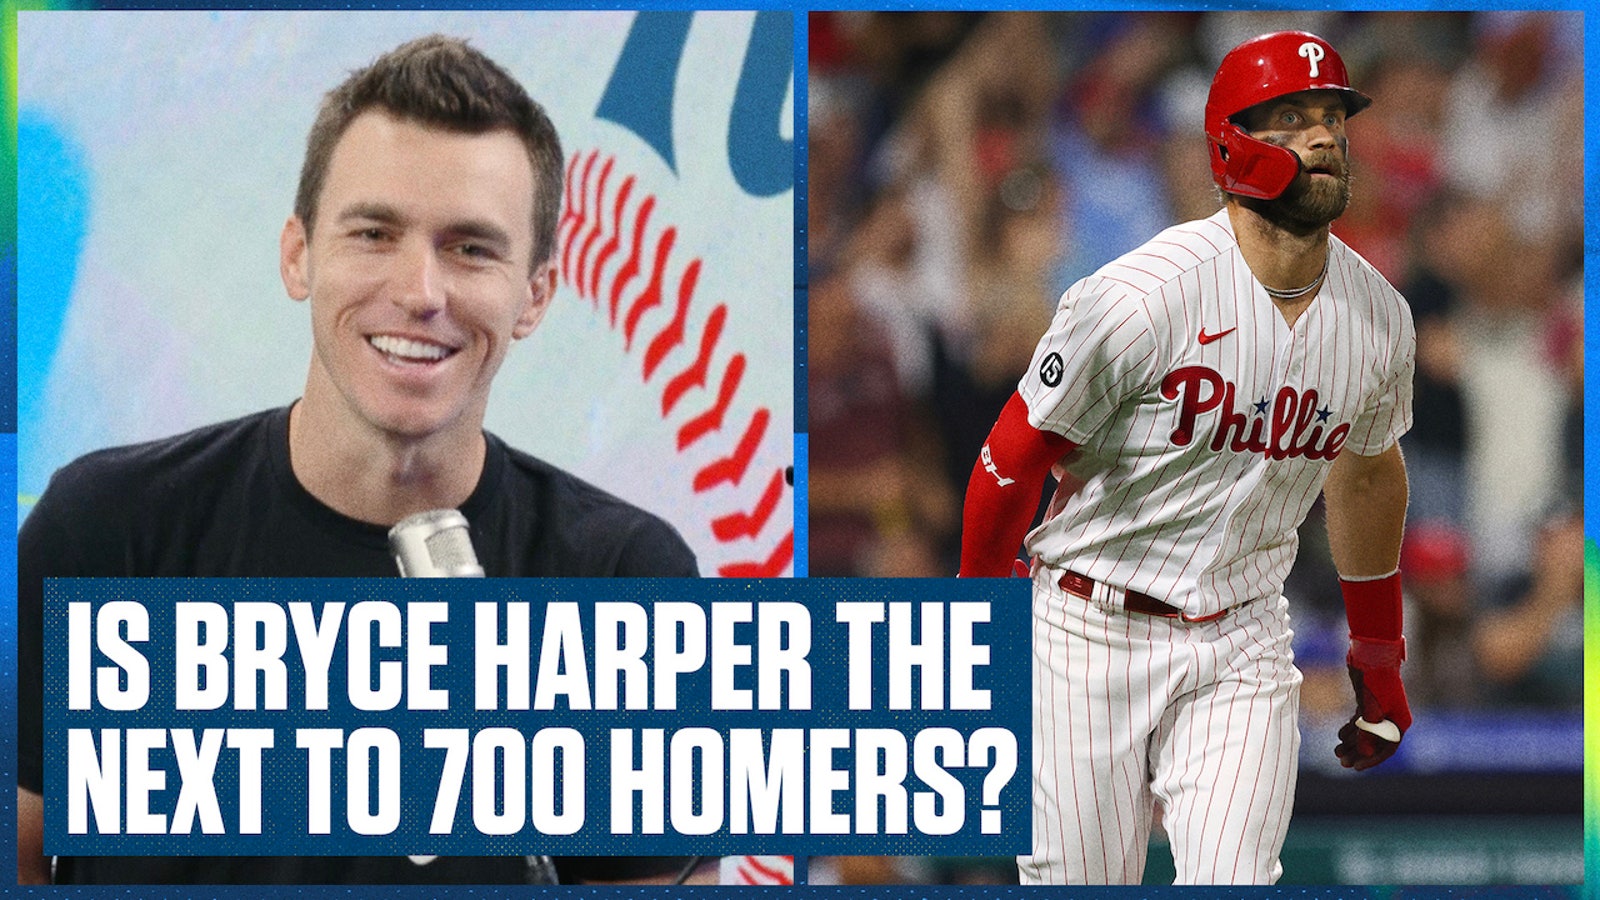 Could Bryce Harper be the next hitter to reach 700 home runs?